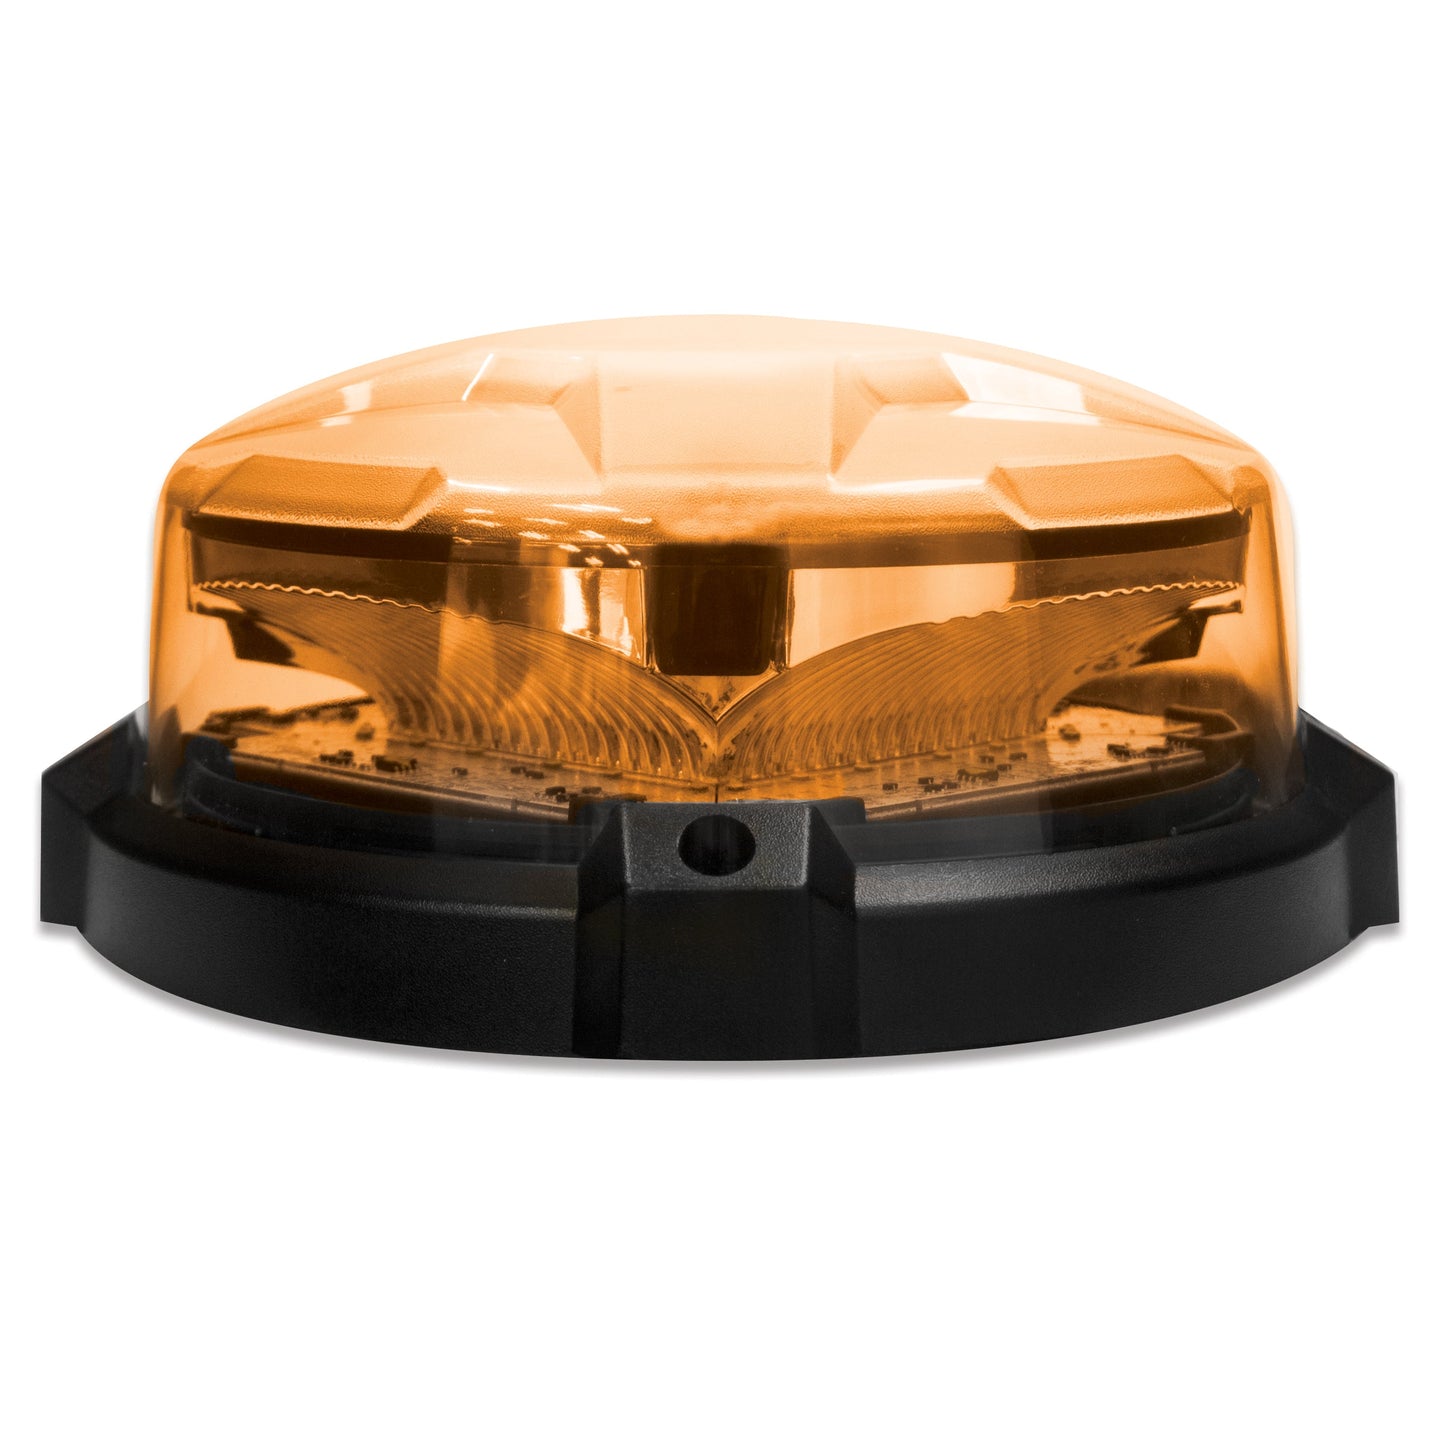 Soundoff Signal PNRBCDMHA High Dome For Nroads® Beacons - Amber